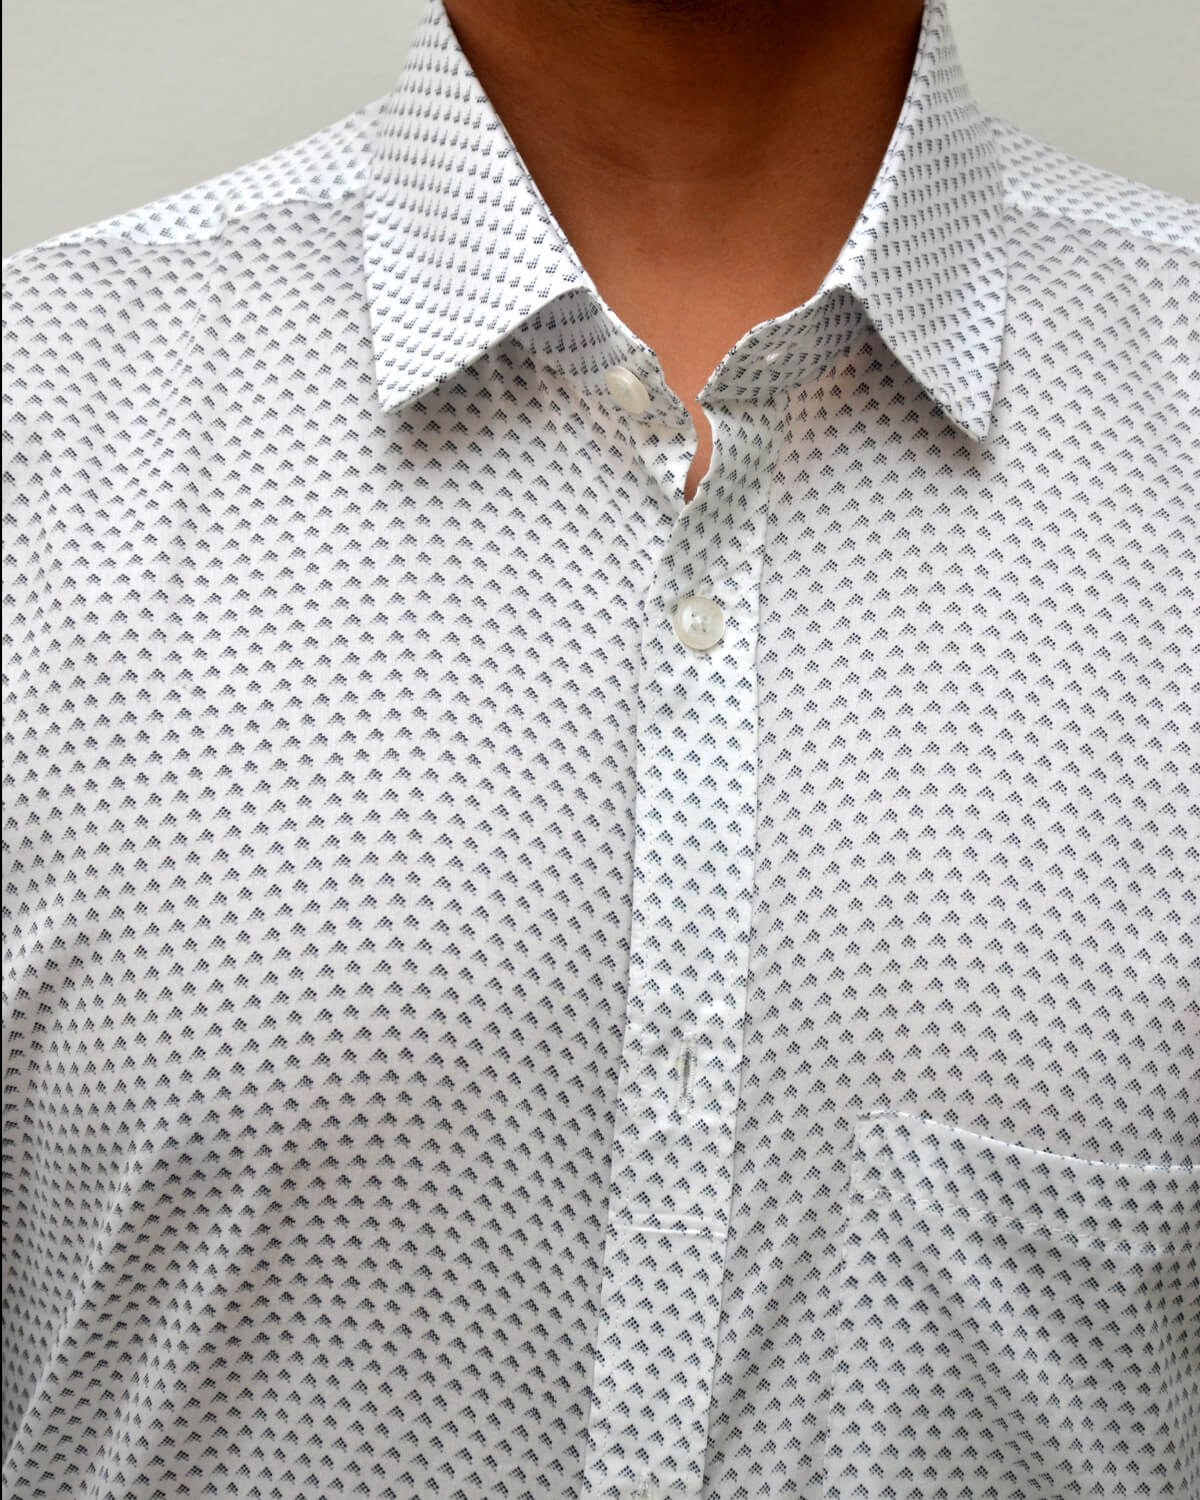 Slim Fit Dotted Shirt - Black/white dotted - Men